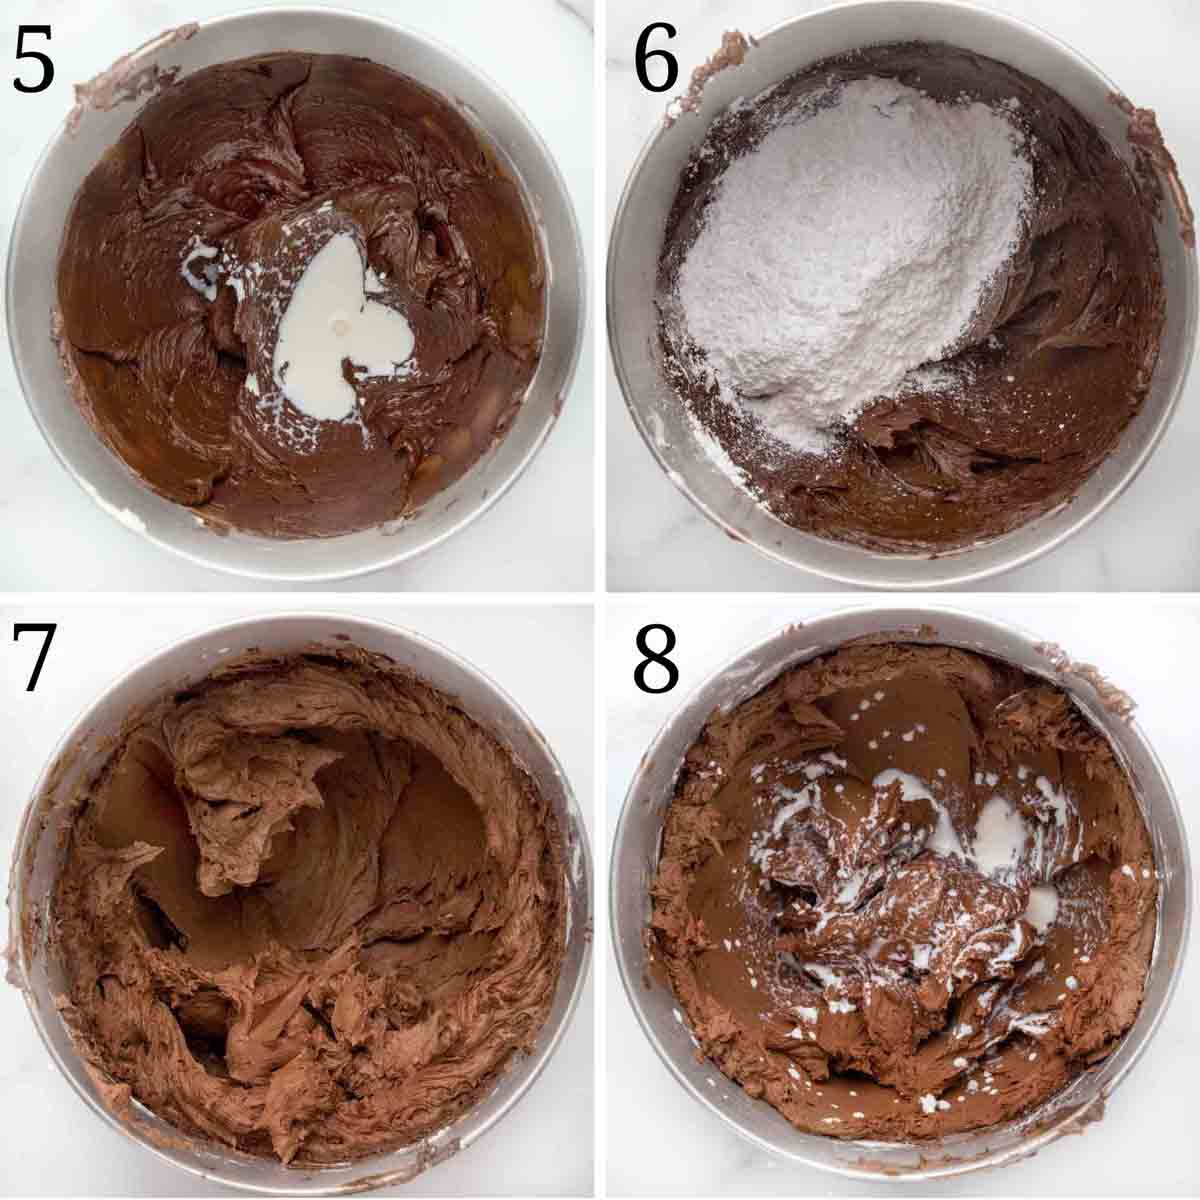 four images showing how to finish making chocolate buttercream frosting.